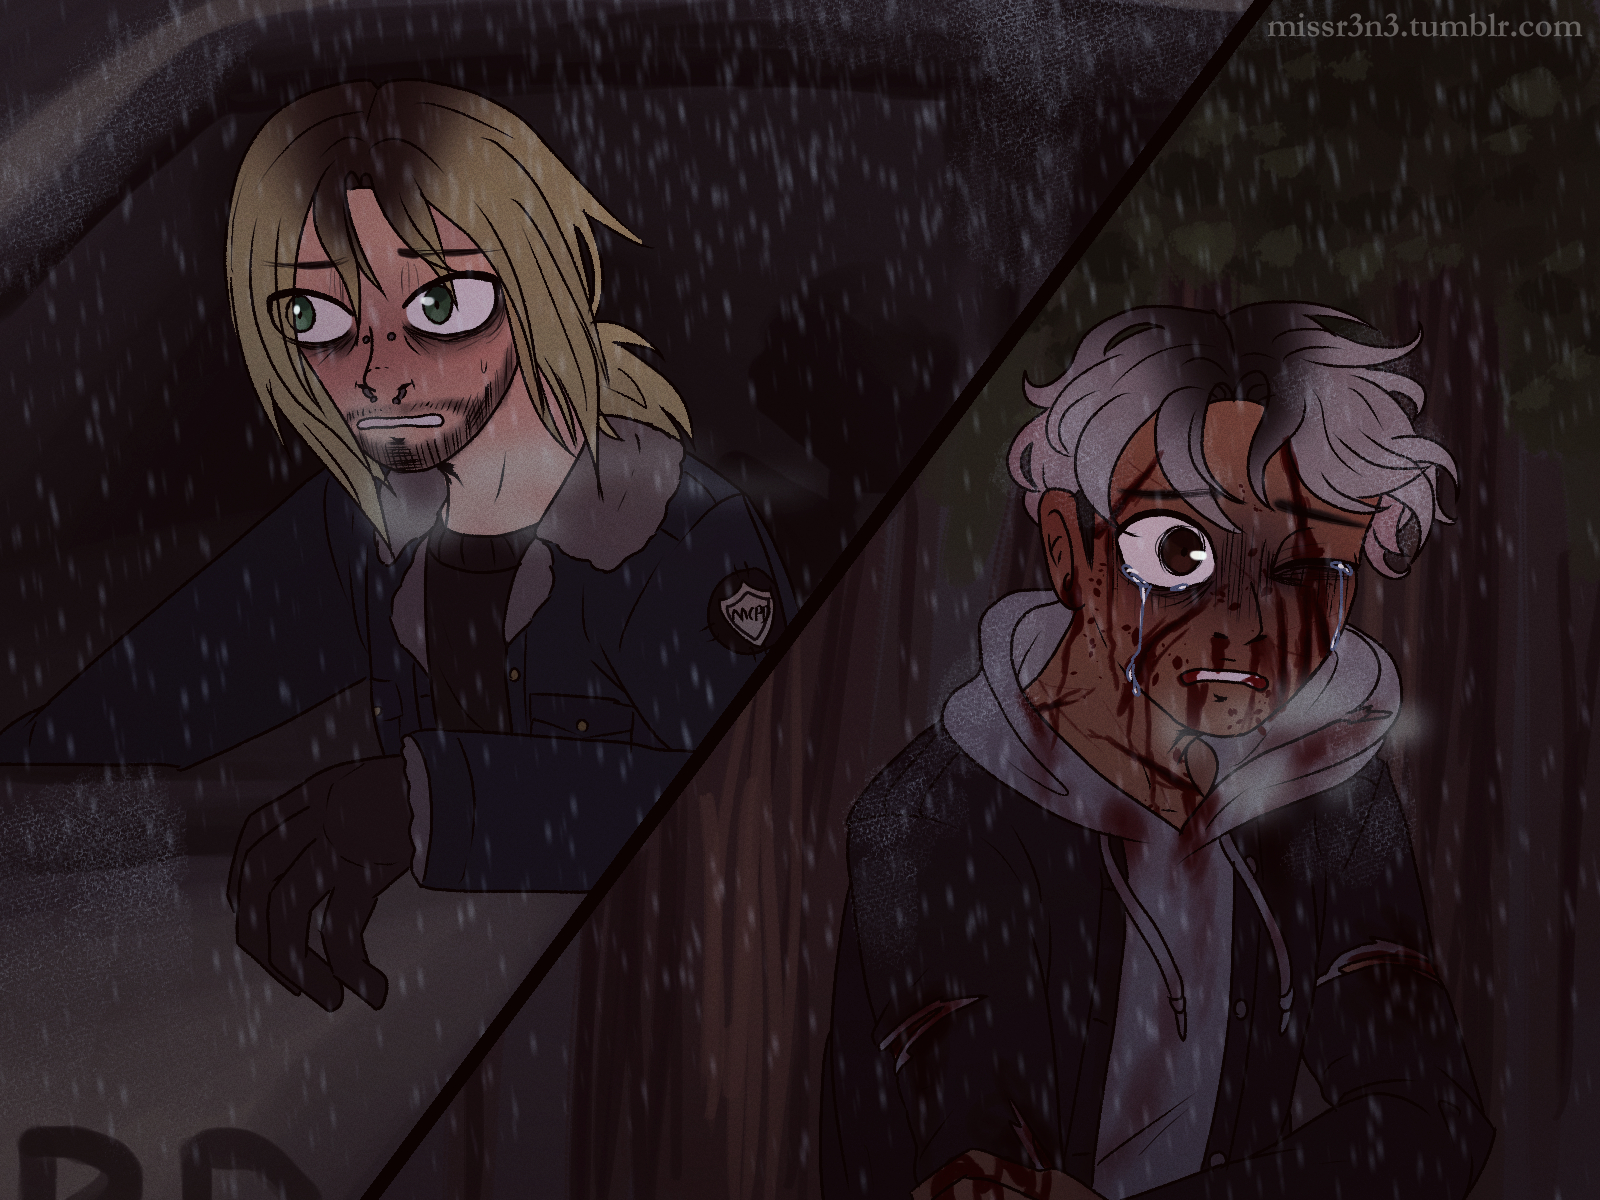 the left panel shows thatcher in his police car, staring ahead with concern through the snow. right panel shows jonah, his face cut up and covered in blood with tears in his eyes